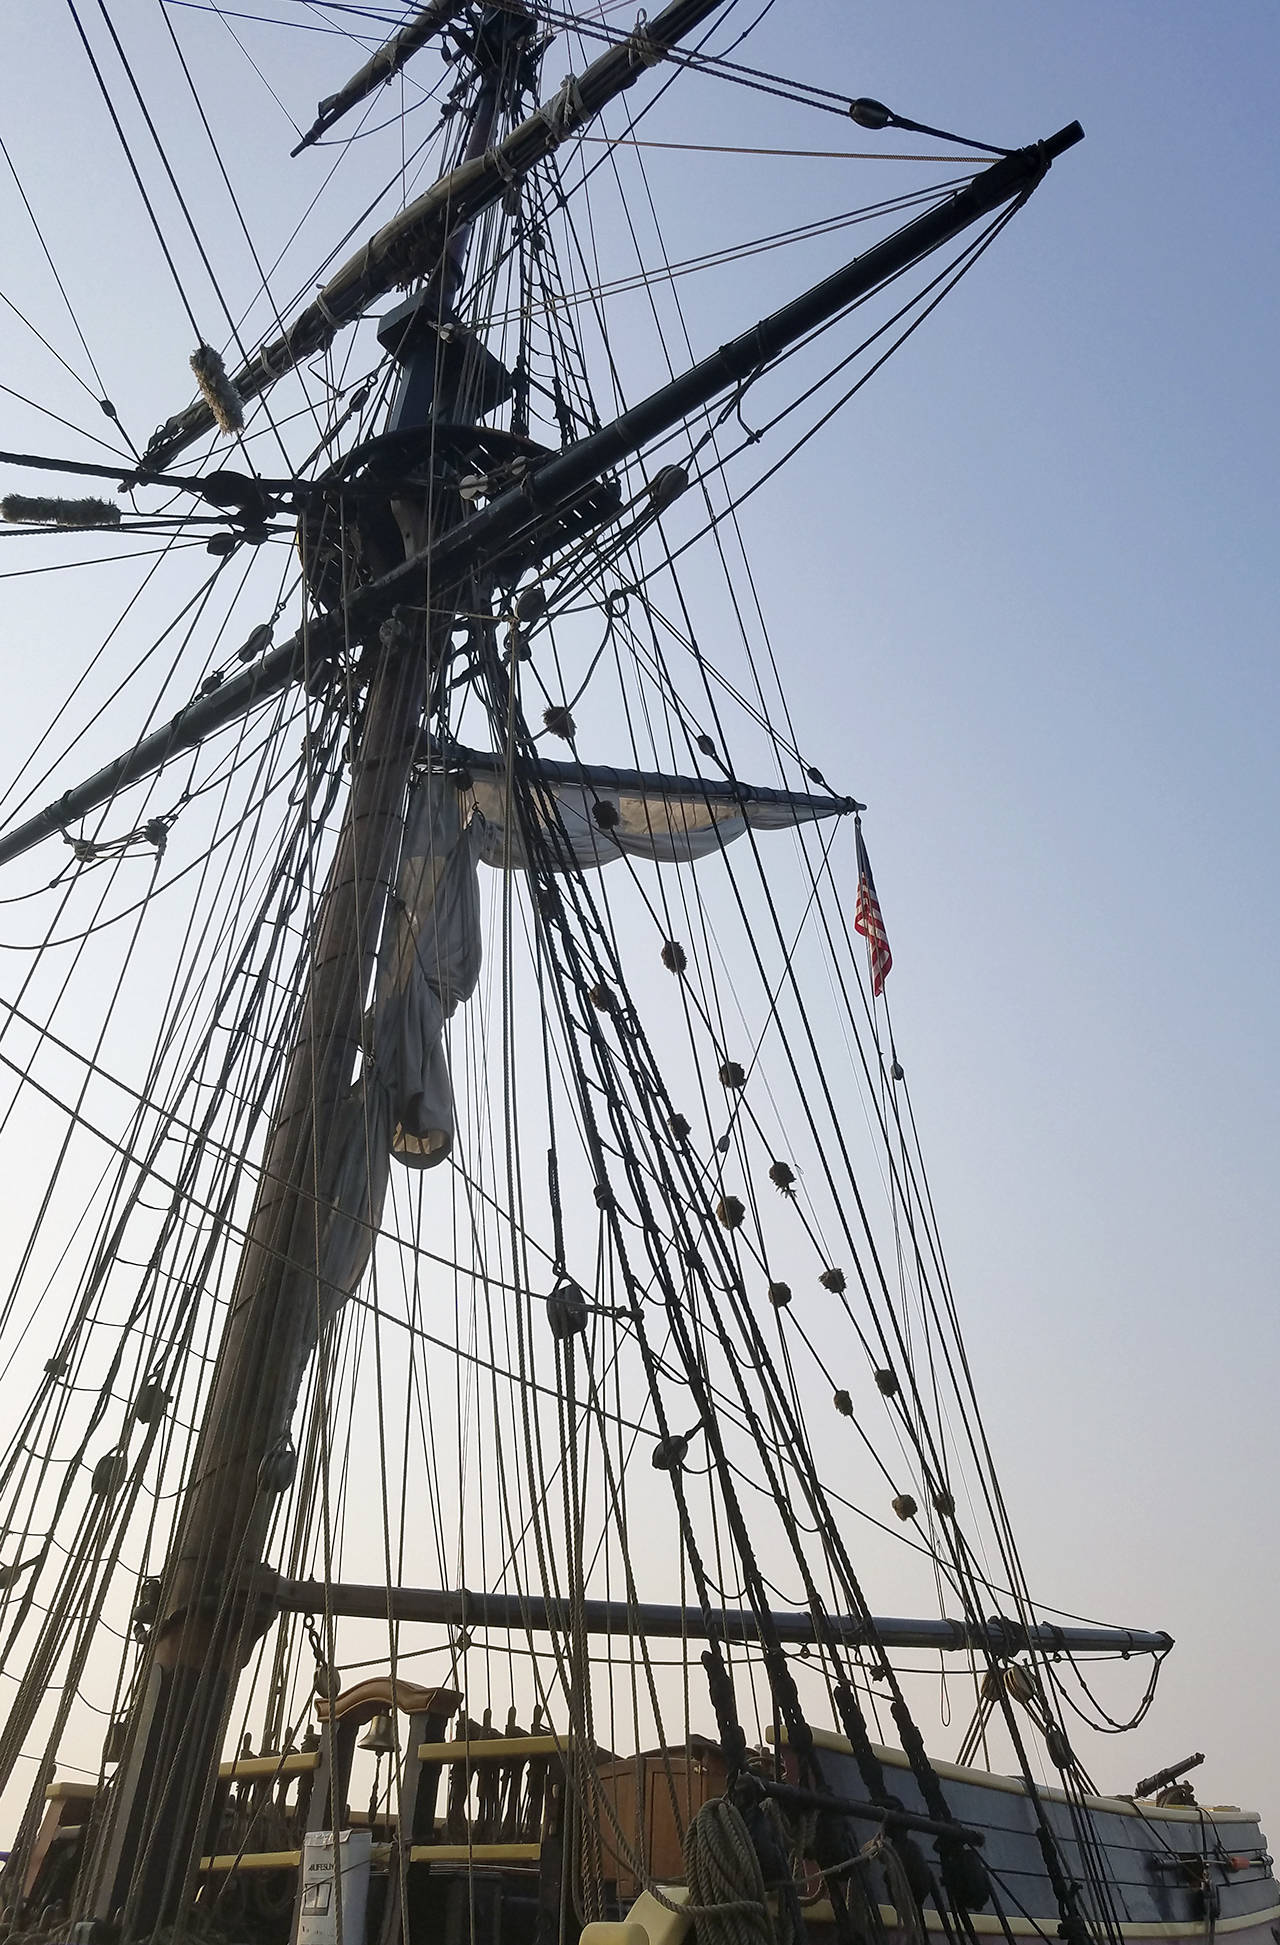 Notice in this photo and others of the Lady Washington that each mast is actually made up of several masts stacked one atop the other, with each one getting smaller in diameter. These so-called “top masts” could be lowered in the event of bad weather. According to Capt. J. B. Morrision, who once commanded the Lady Washington, having top masts is what qualifies a vessel to be called a “tall ship.”                                Terryl Asla/Kitsap News Group